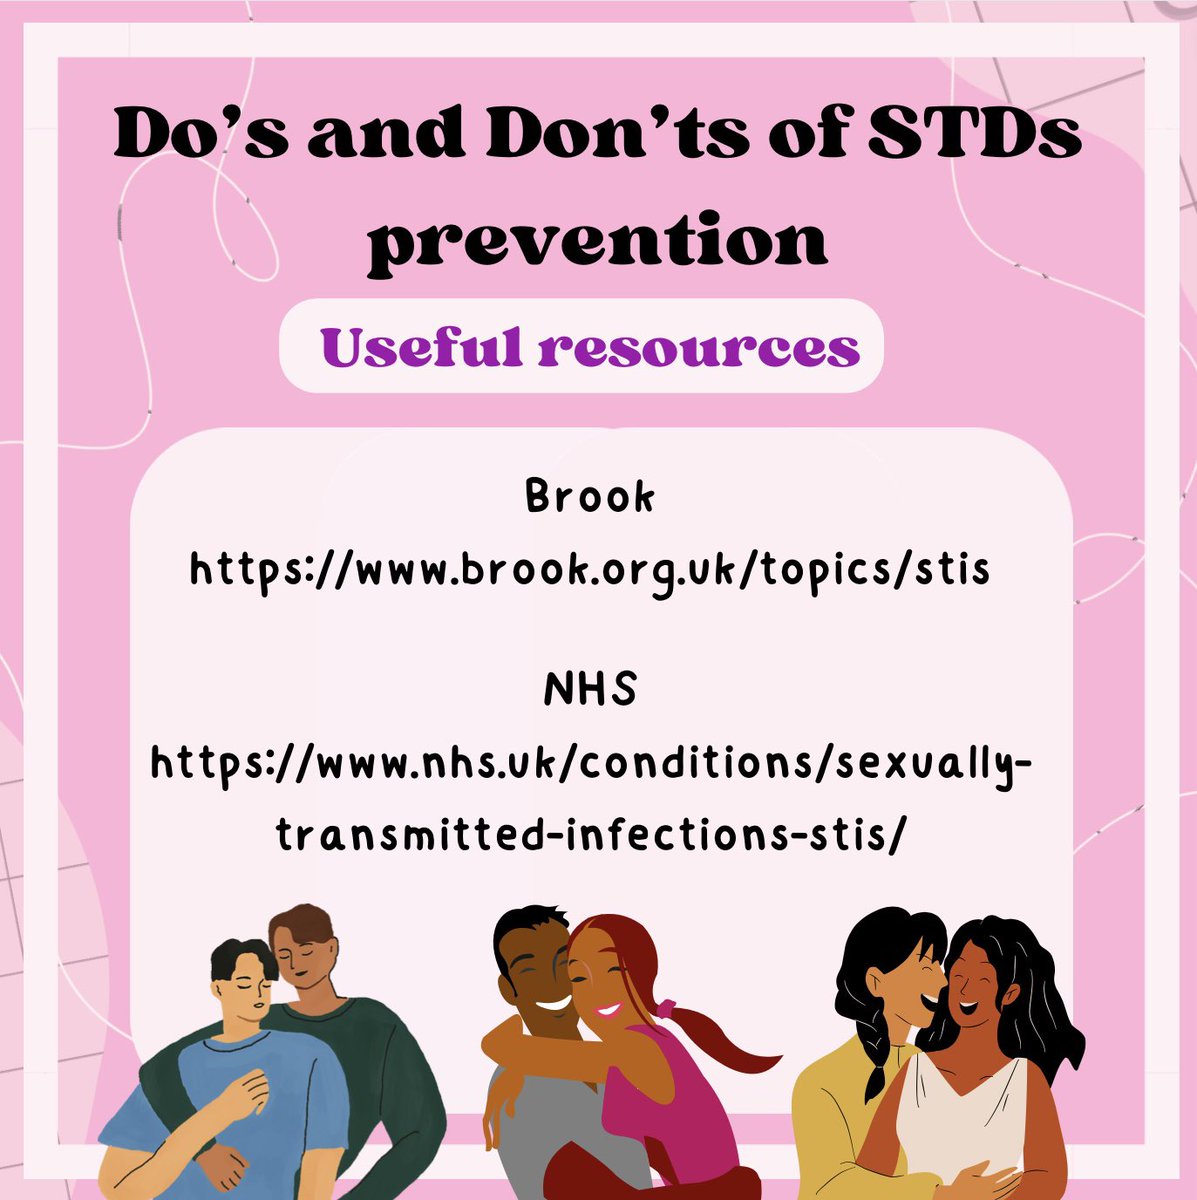 Hello everyone! Have you heard of the #bestifyoutest campaign? @Sexpression is promoting safe sex by encouraging using condoms and testing yourself regularly to keep everyone safe and decrease the amount of people suffering from STDs (Sexually Transmitted Diseases) in the UK.